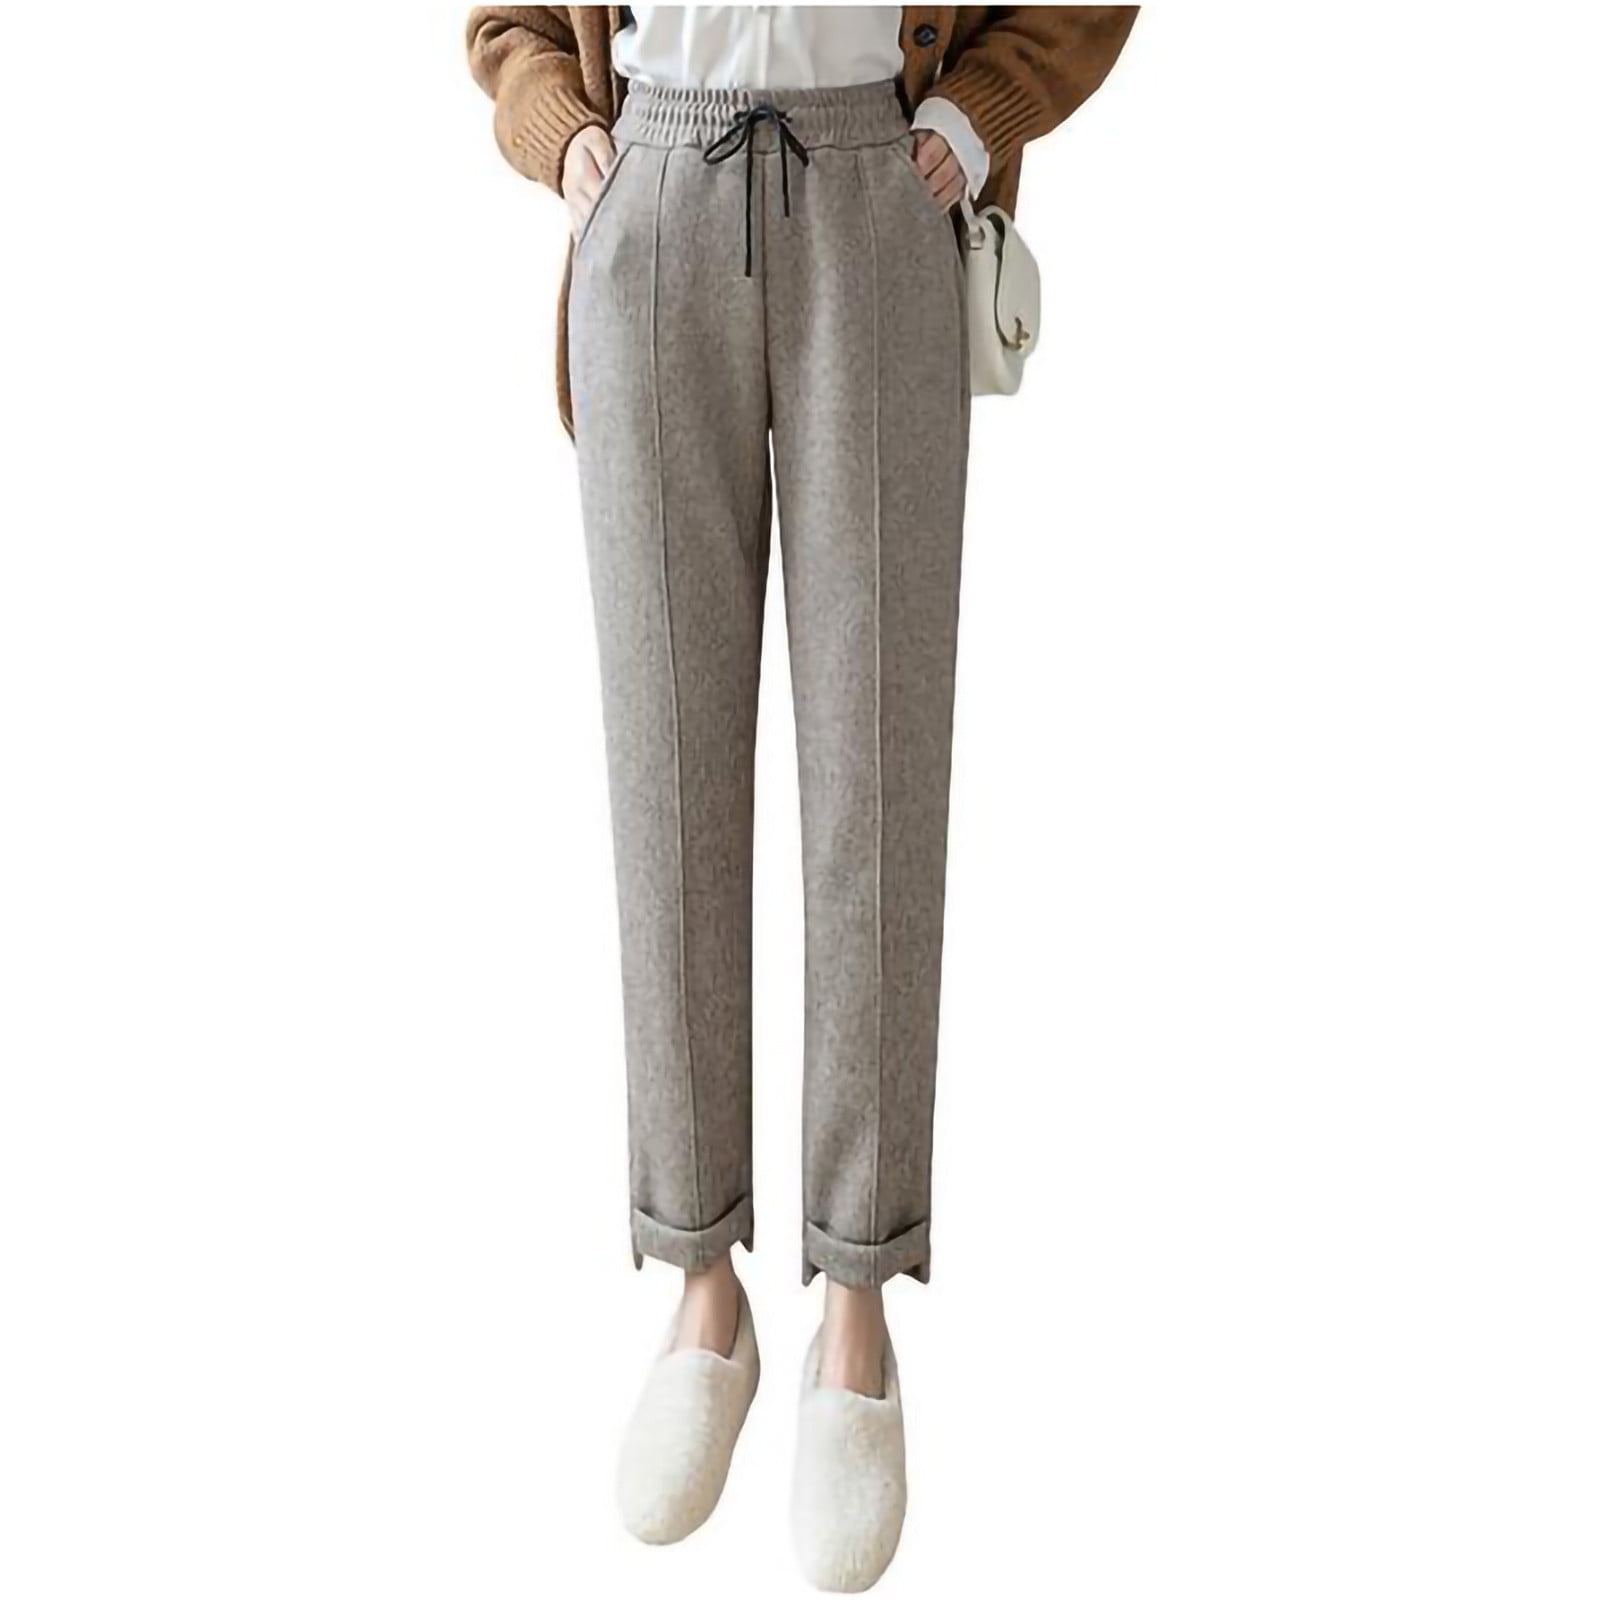 Columbia Women's Pants On Sale Up To 90% Off Retail | thredUP